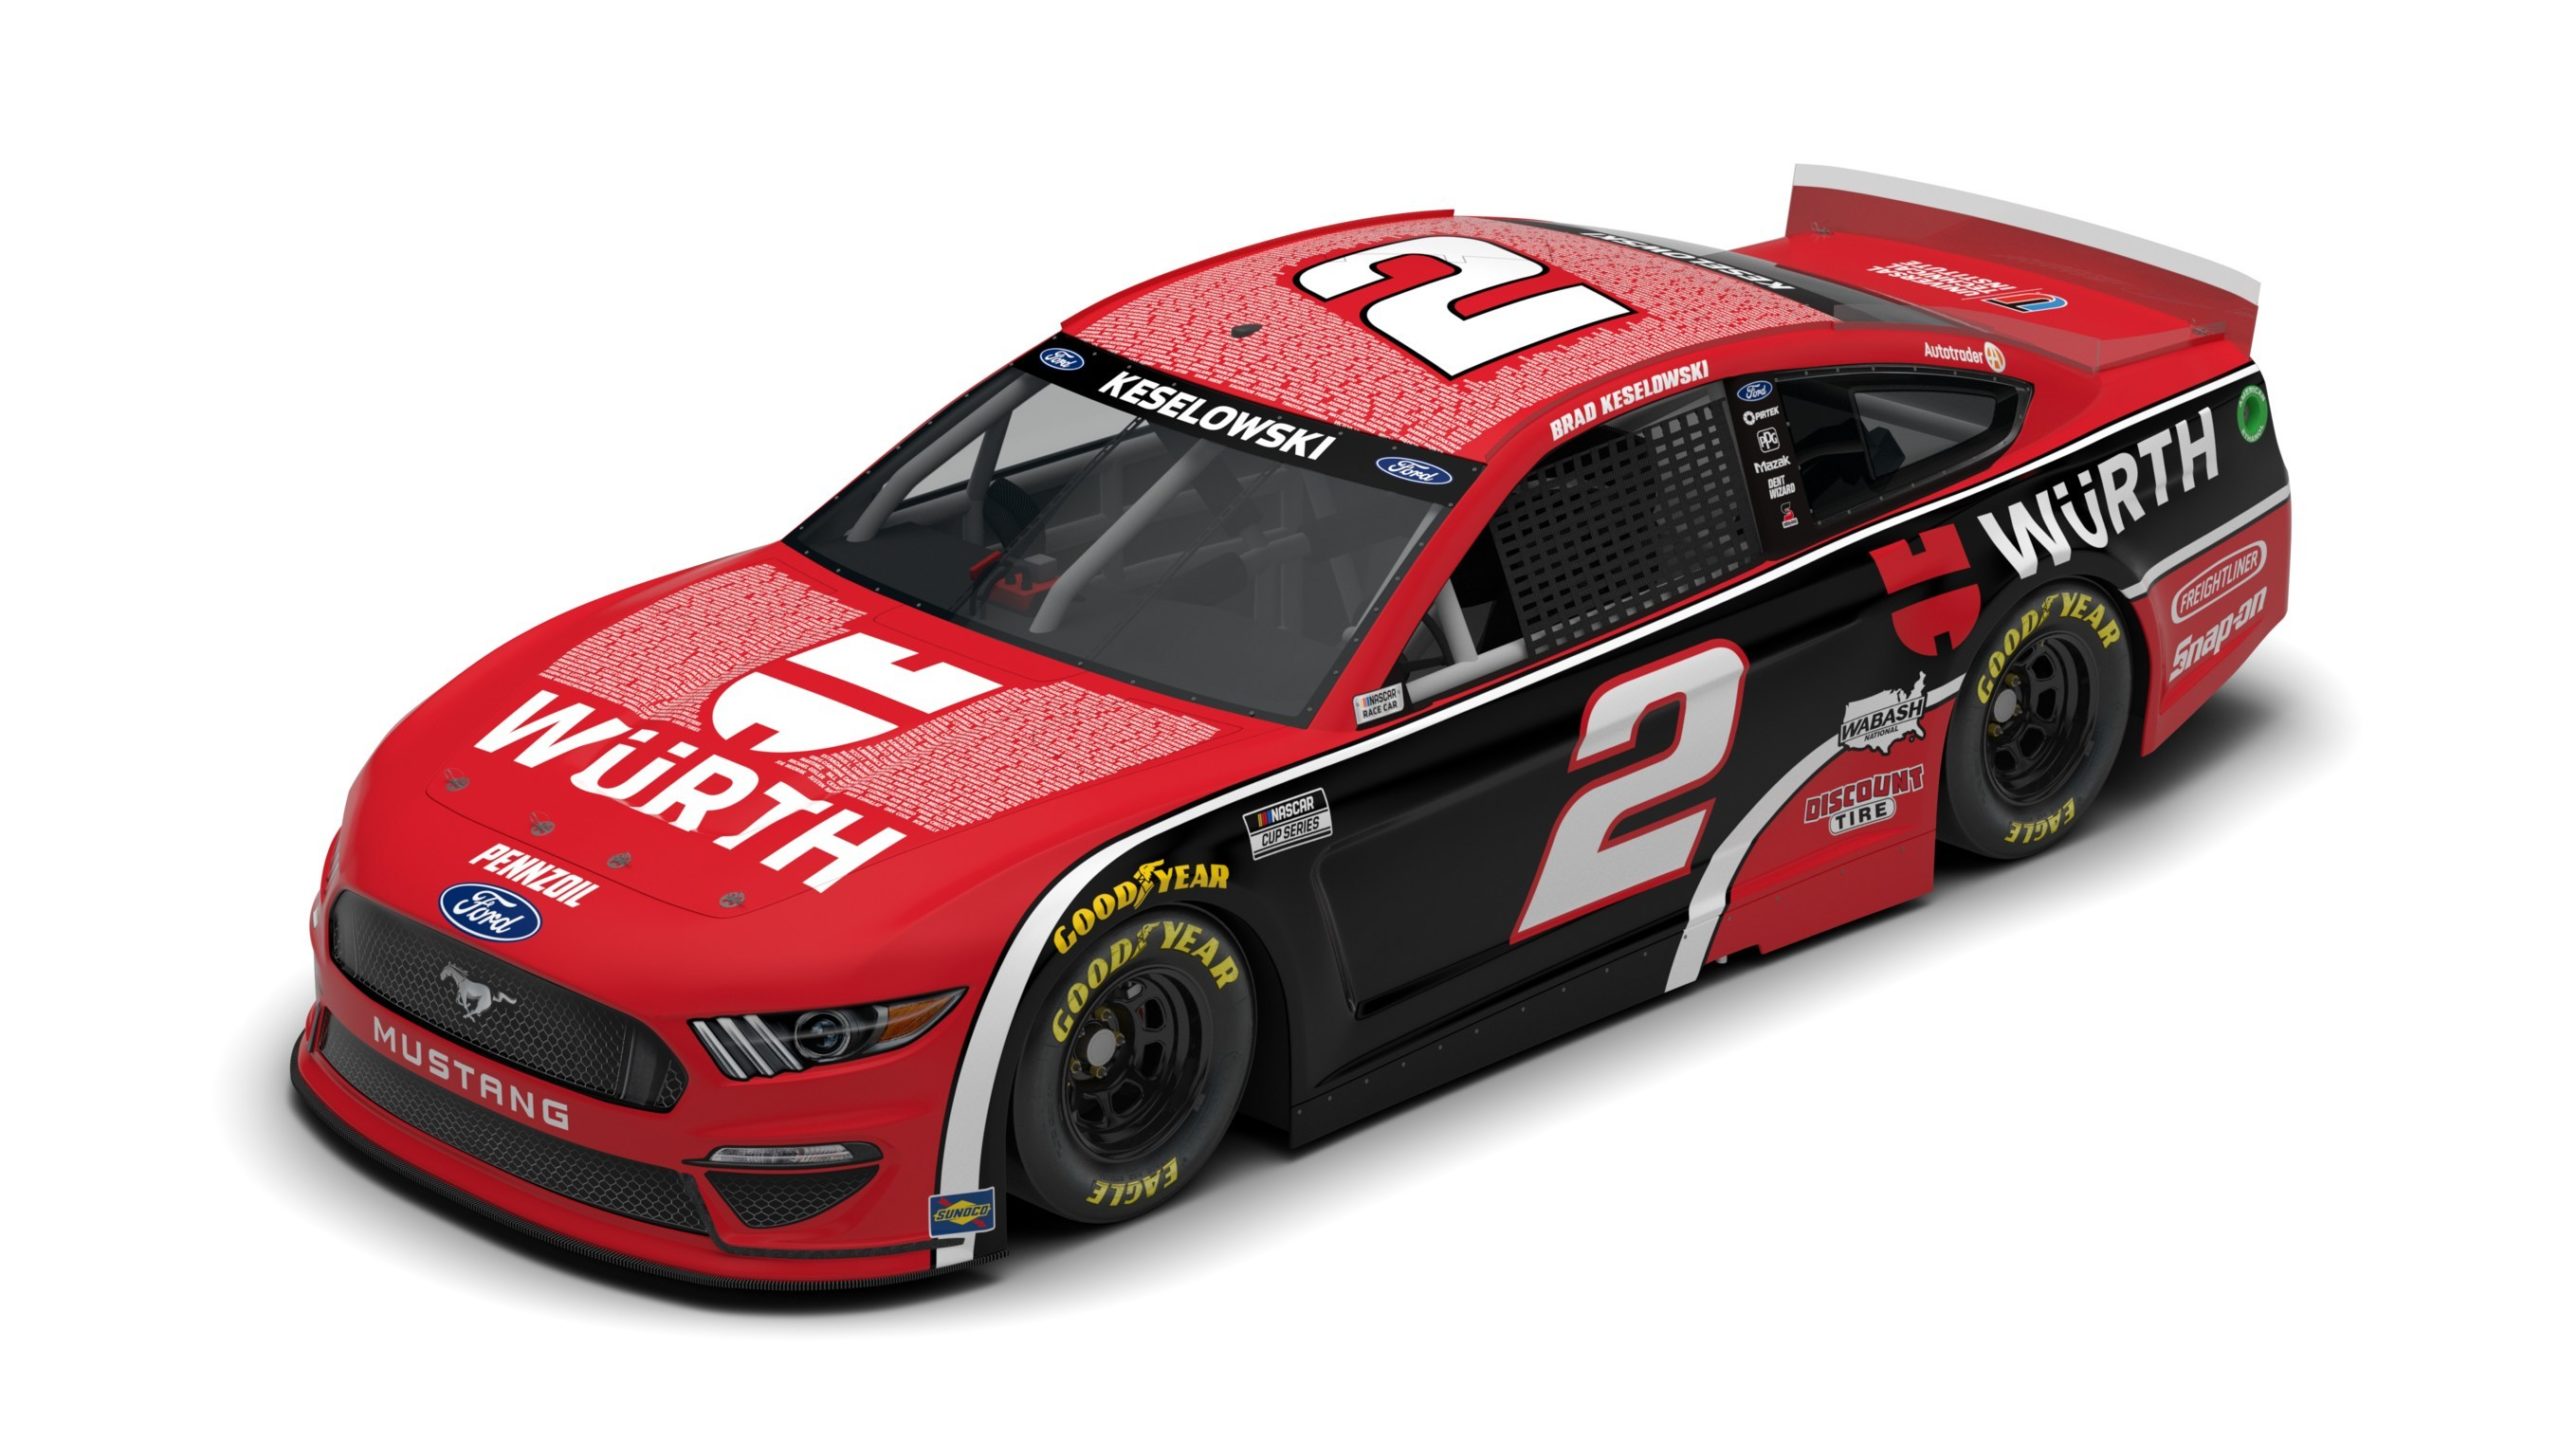 UTI, Würth Recognizing Instructors at NASCAR Cup Series Race | THE SHOP